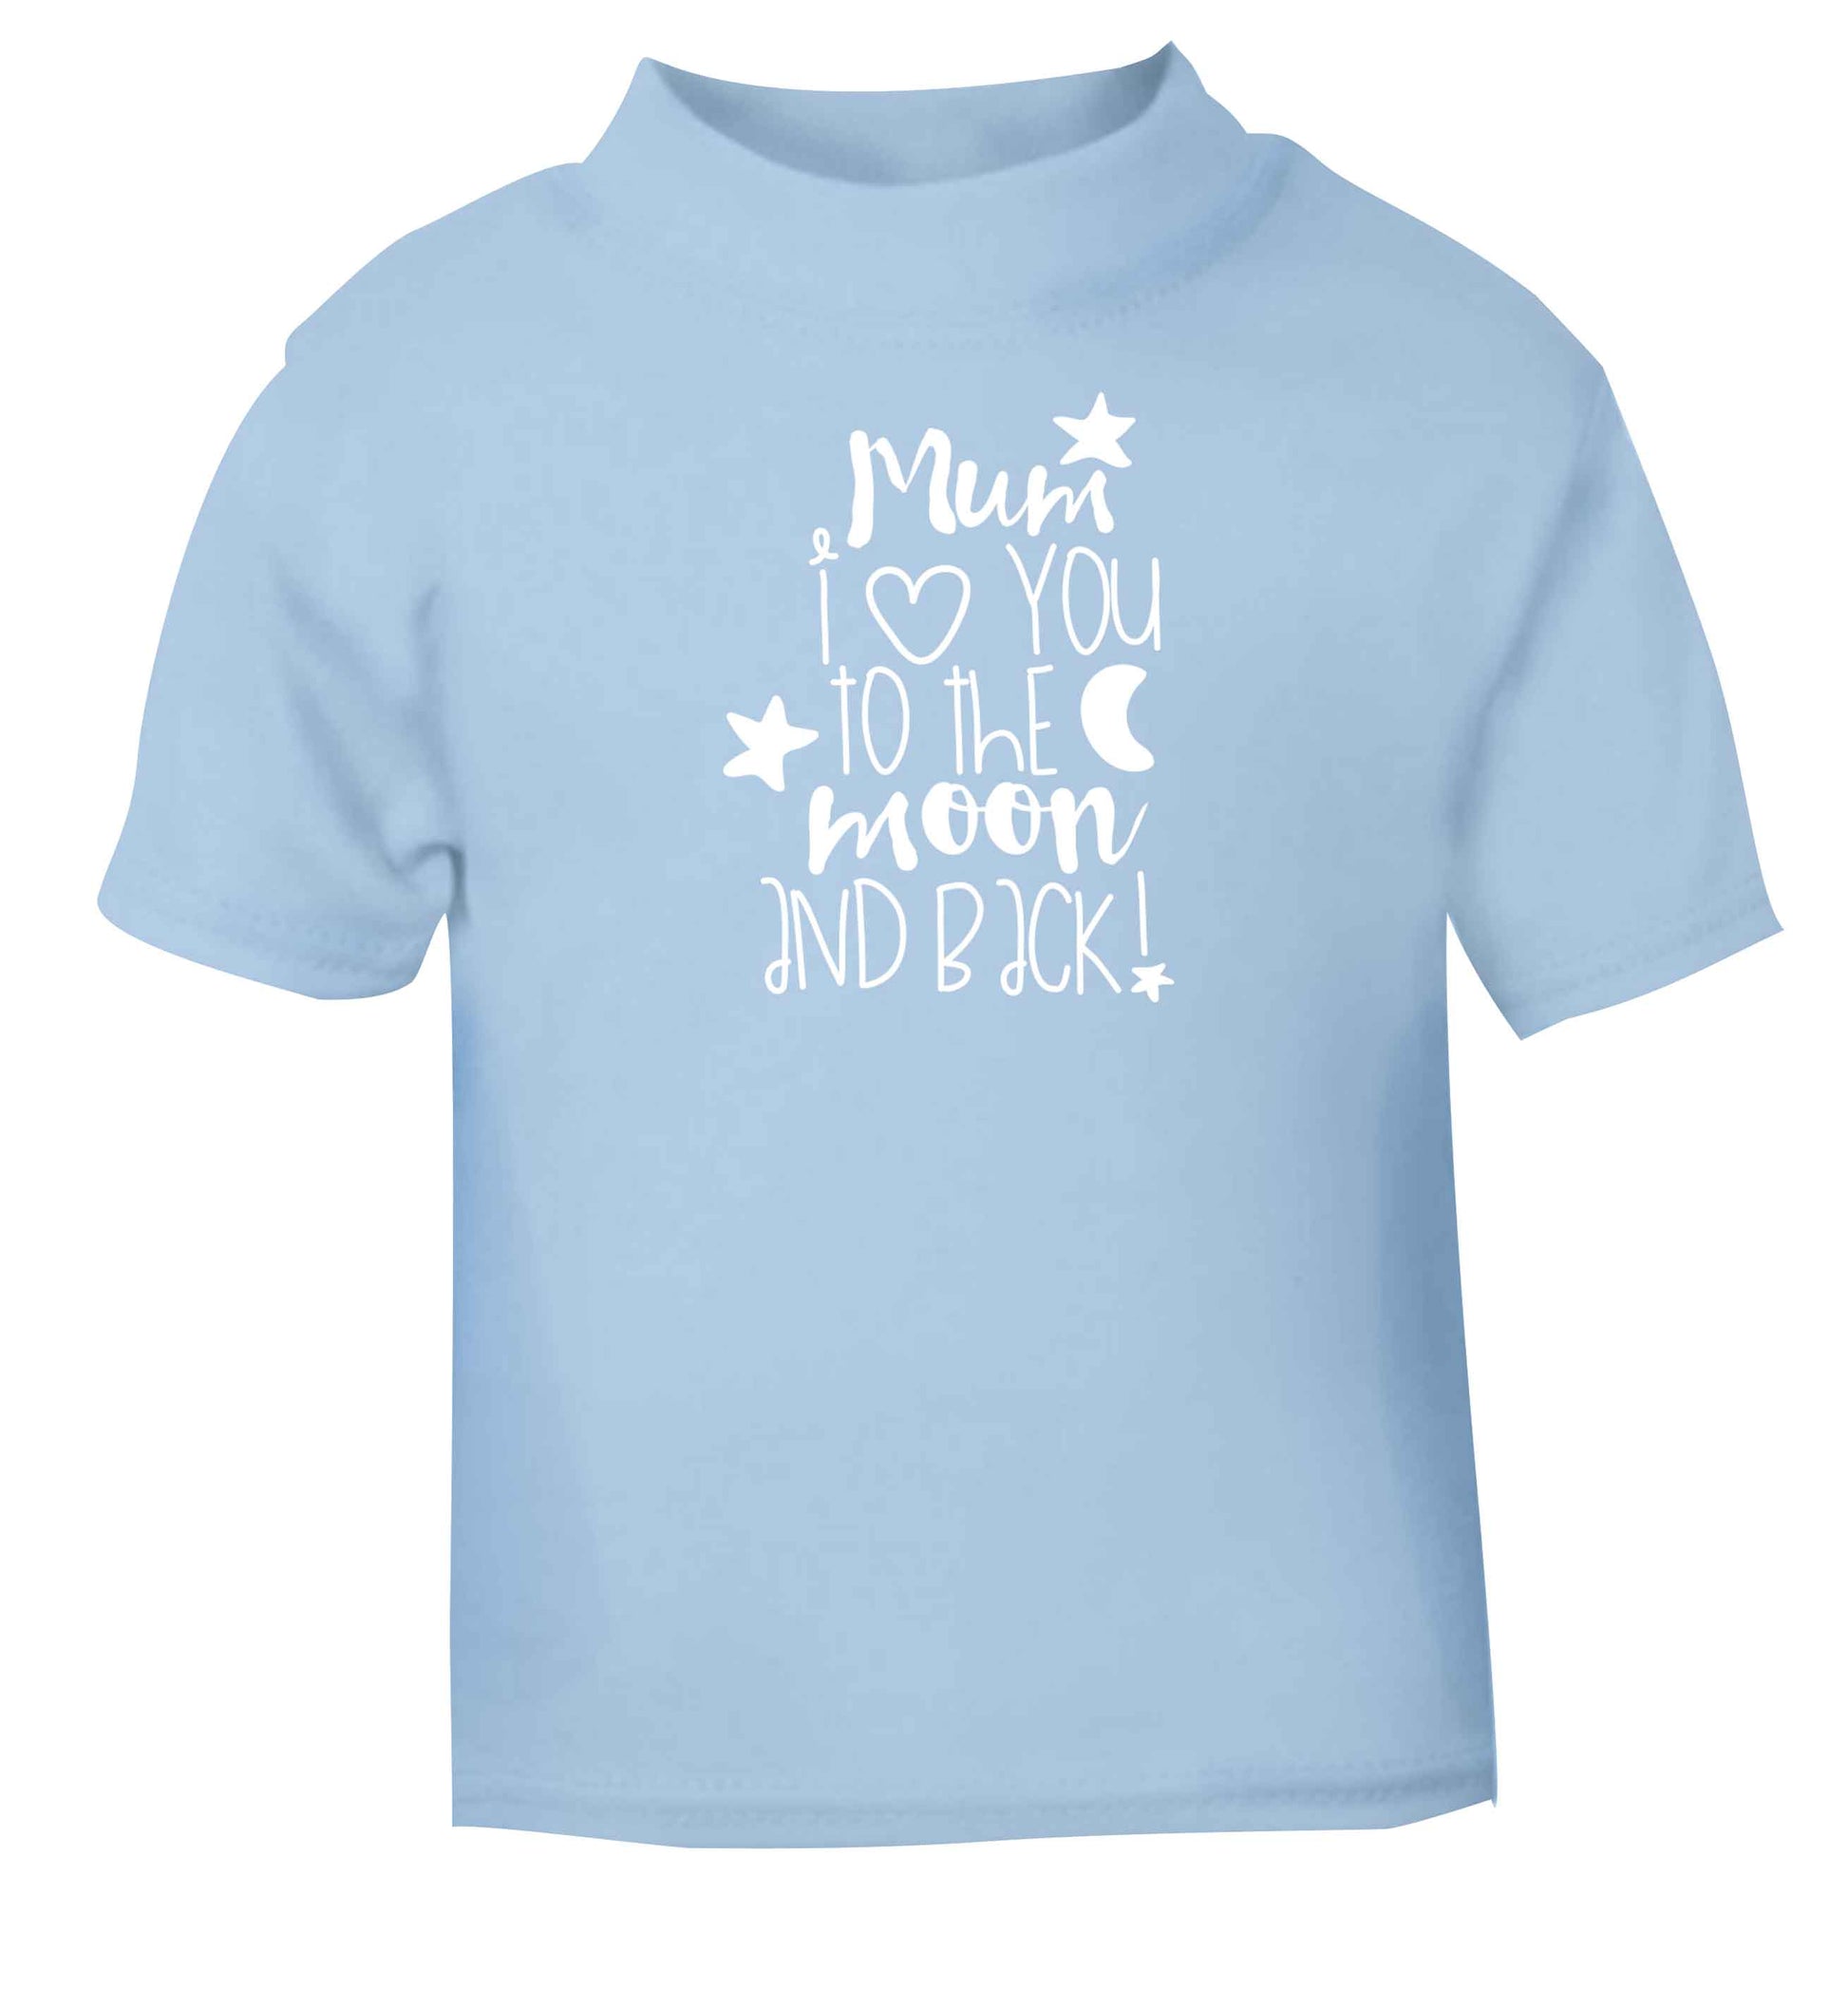 Mum I love you to the moon and back light blue baby toddler Tshirt 2 Years